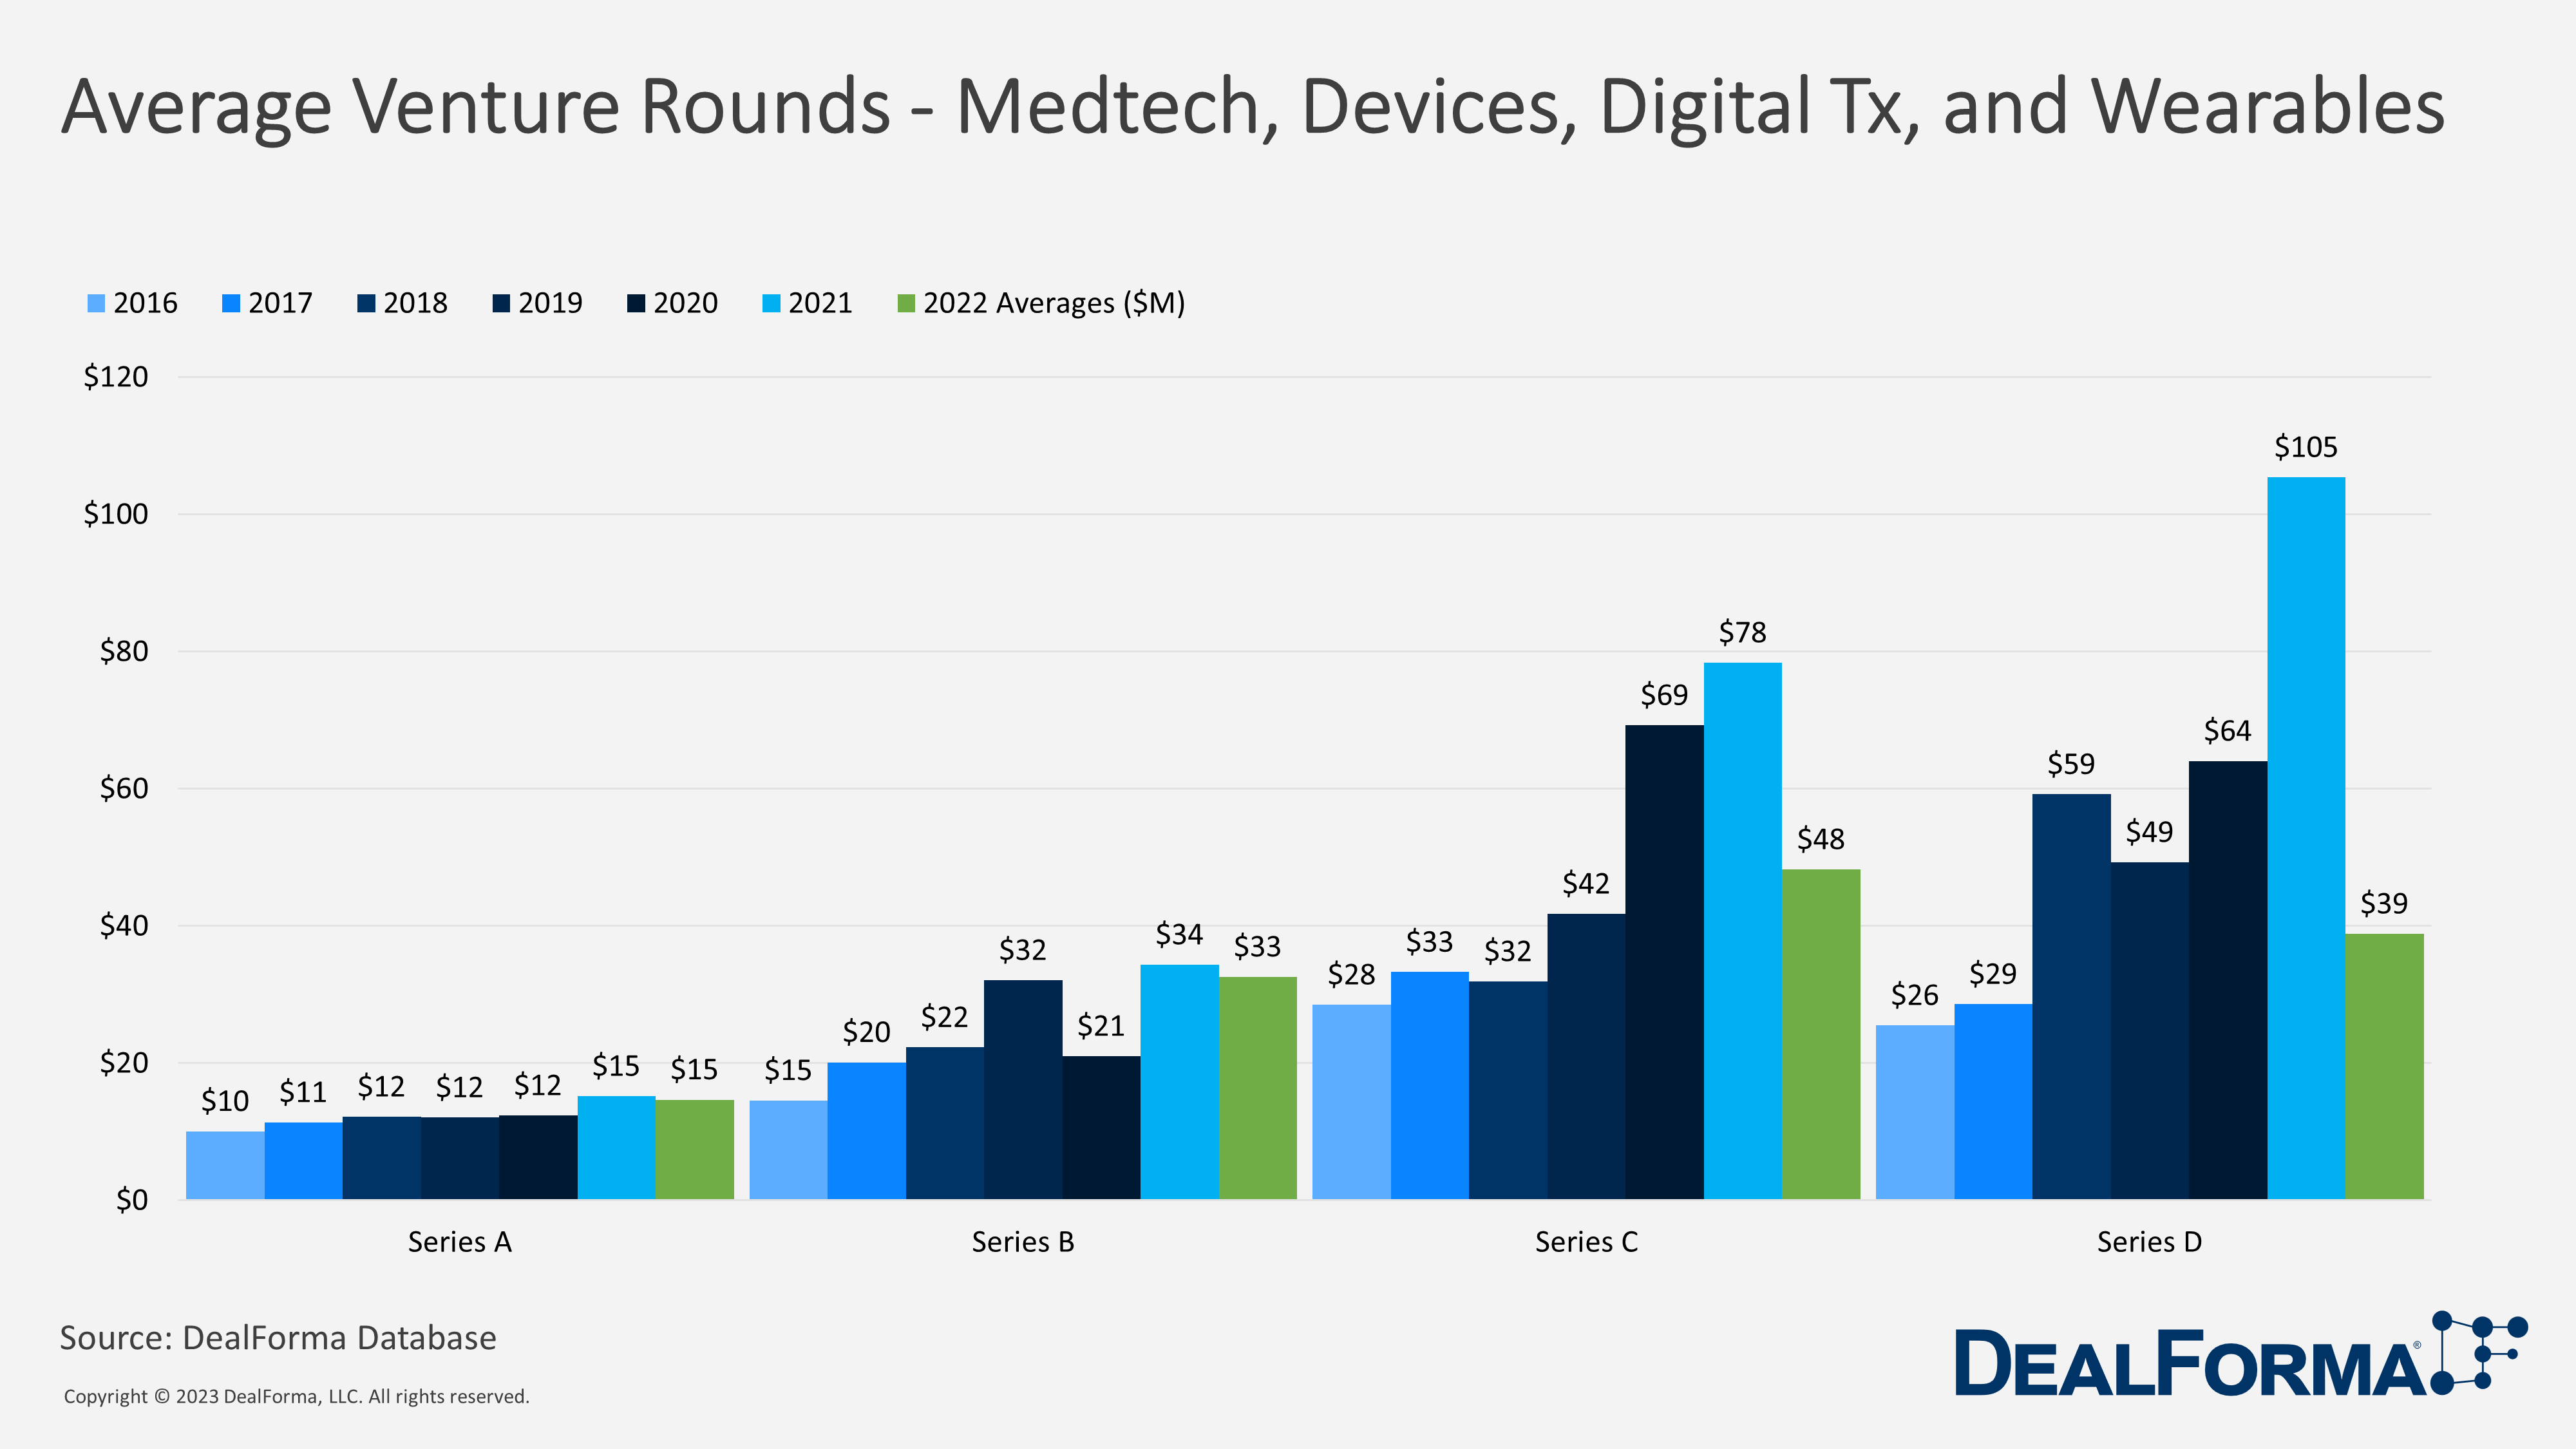 Average Venture Rounds - Medtech, Devices, Digital Tx, and Wearables